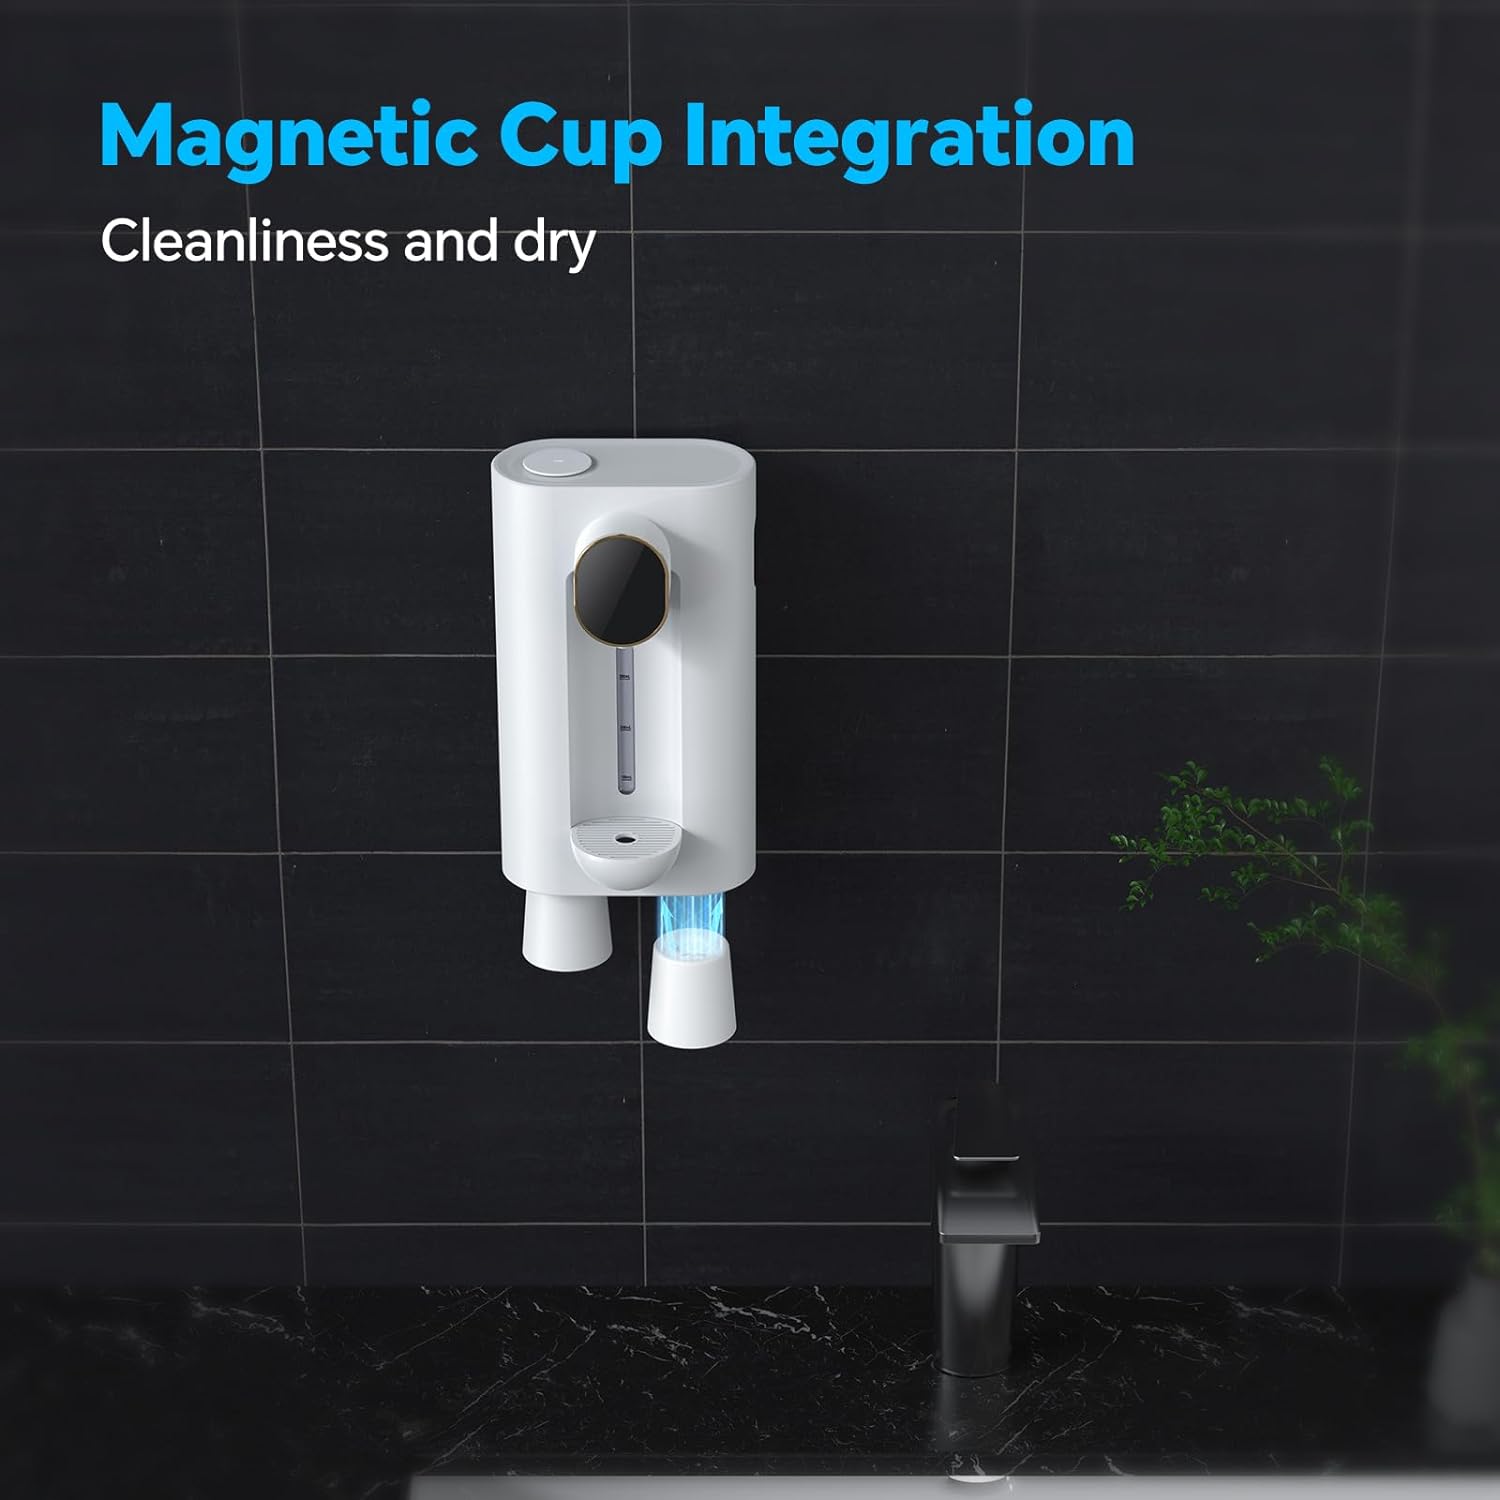 Automatic Mouthwash Dispenser Touchless 540ml(19 Oz) Magnetic Cup Rechargeable Battery and Wall Mounted Design 3 Gears with led Screen